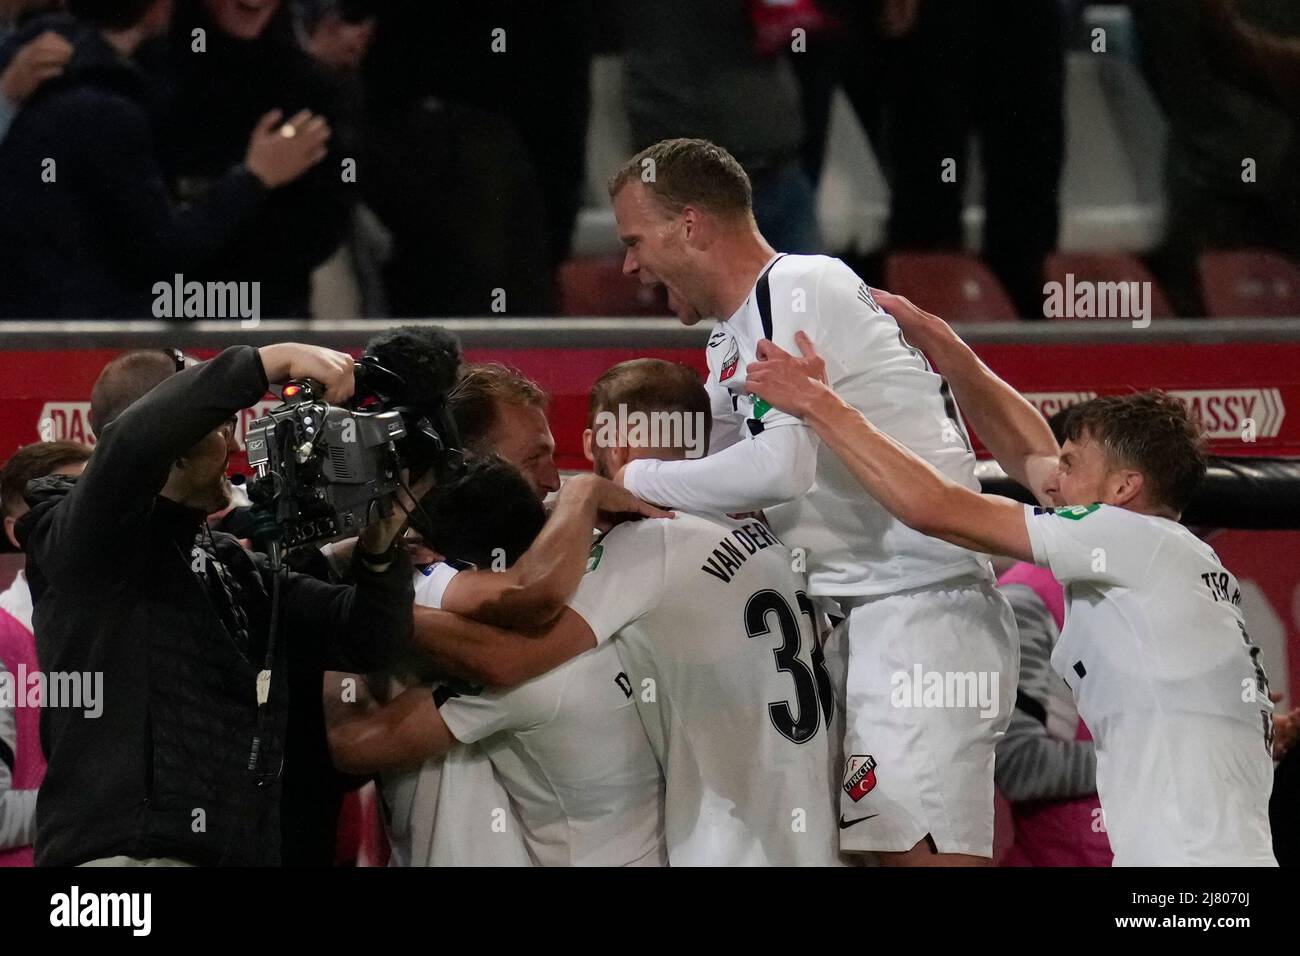 Players Fc Hermannstadt Celebrating After Scoring Editorial Stock